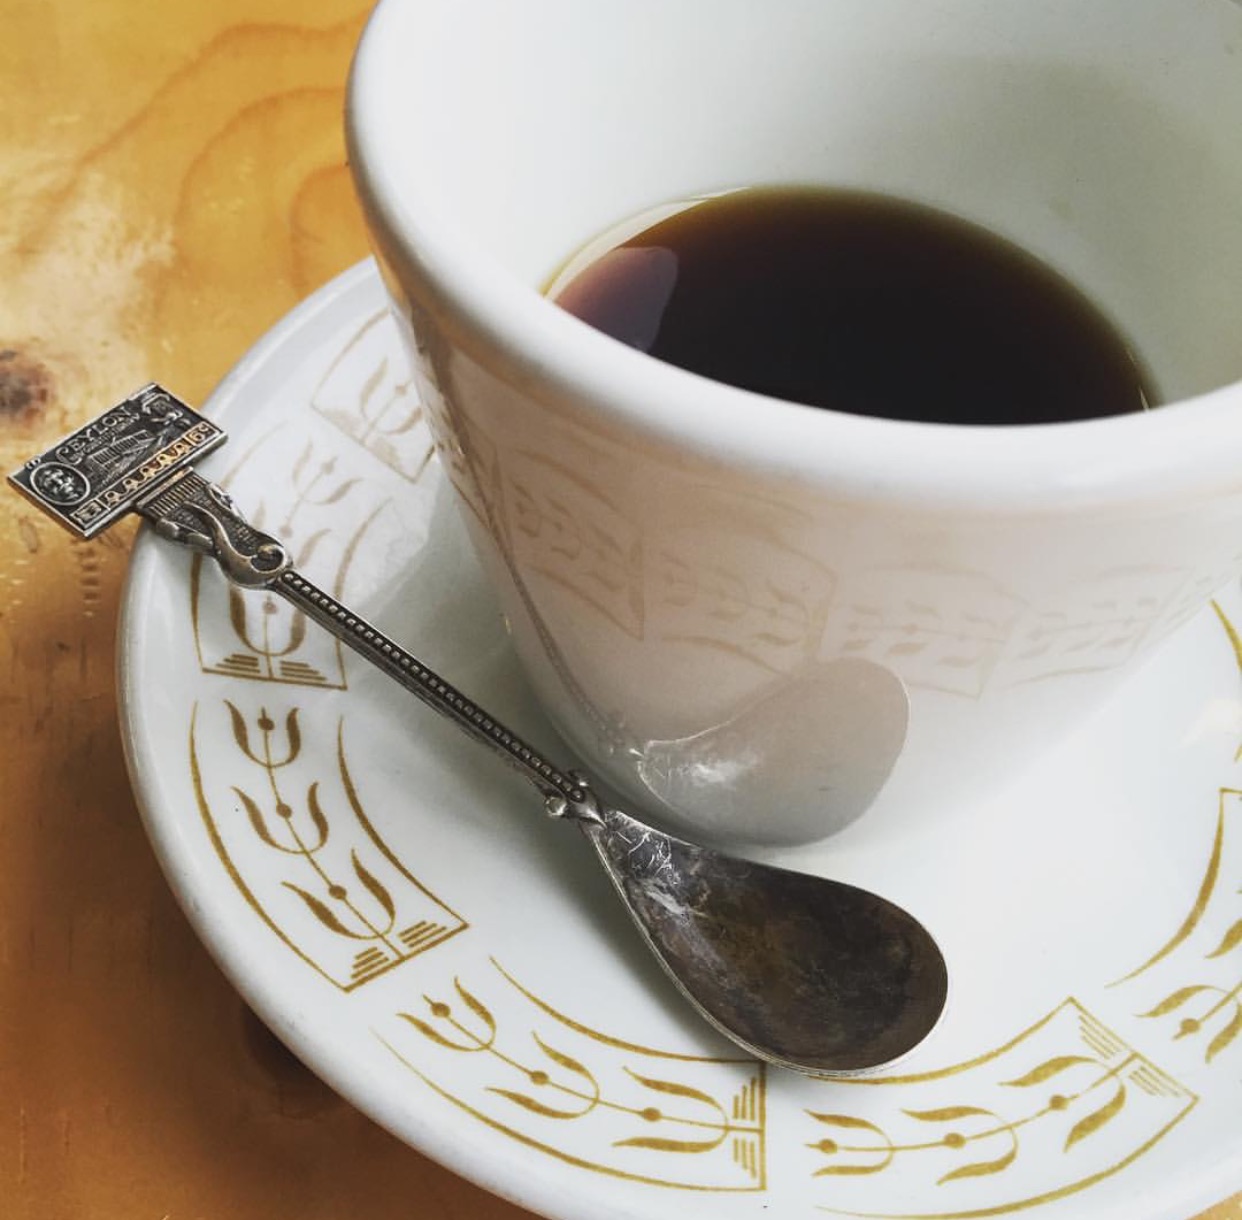 A cup of coffee on a white and gold saucer with a small spoon.